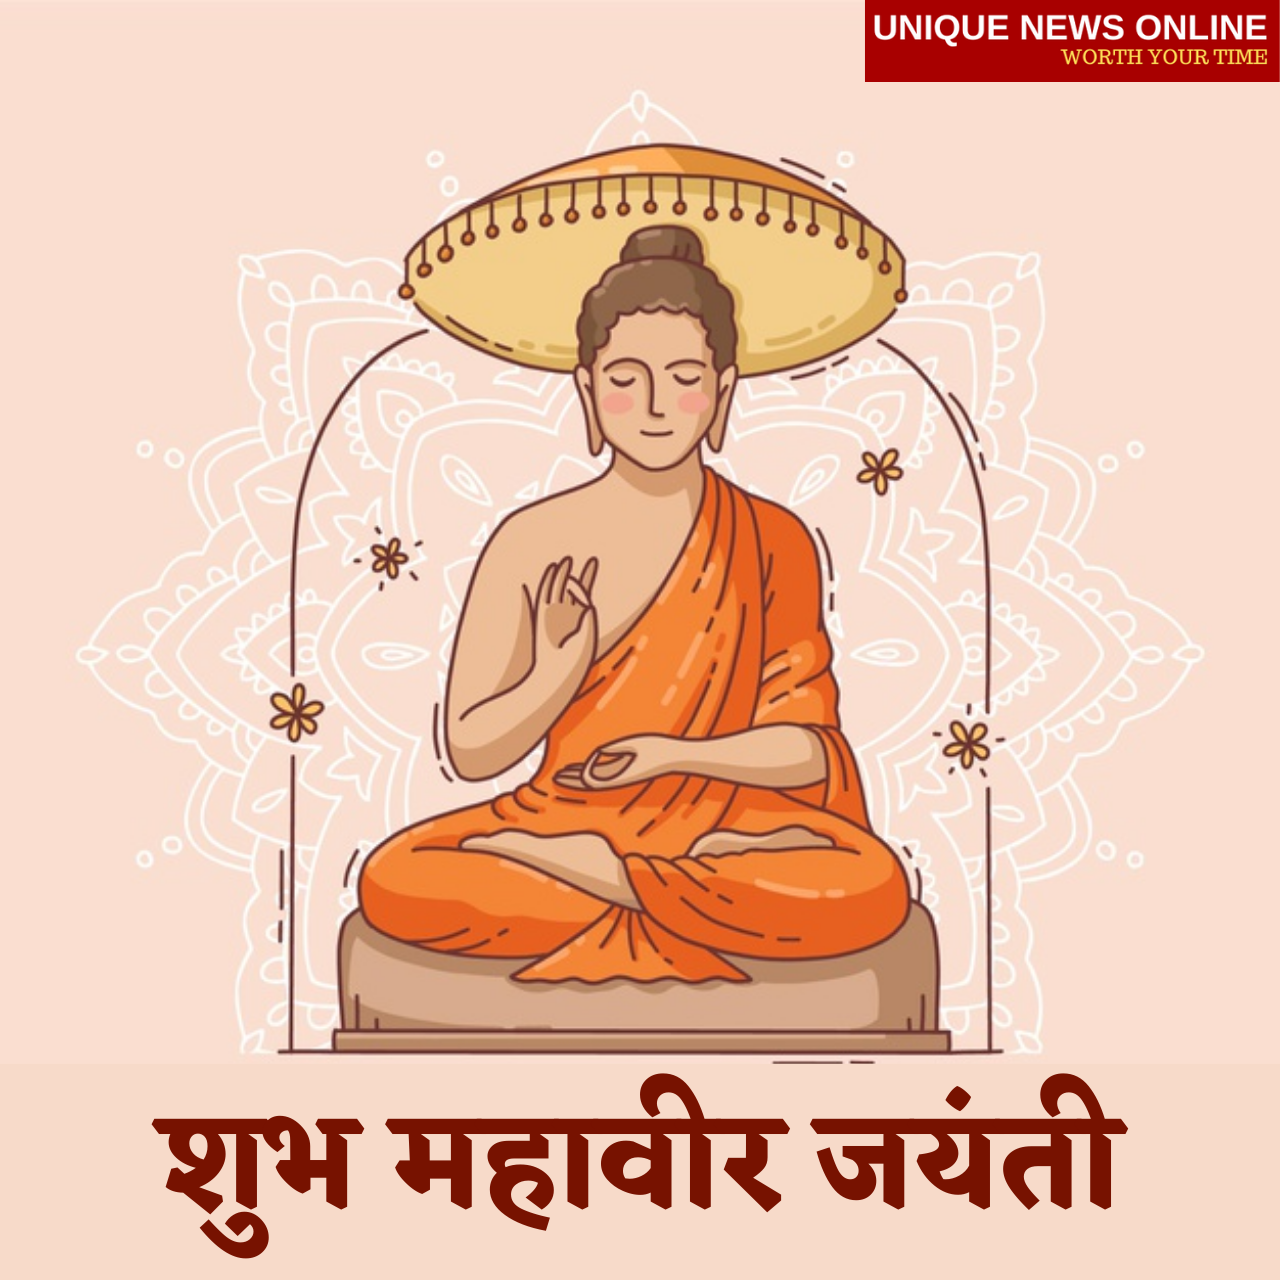 Happy Mahavir Jayanti 2021 Quotes in Sanskrit, Wishes, Messages, Greetings, Quotes, and Images to Share on Mahavir Janma Kalyanak